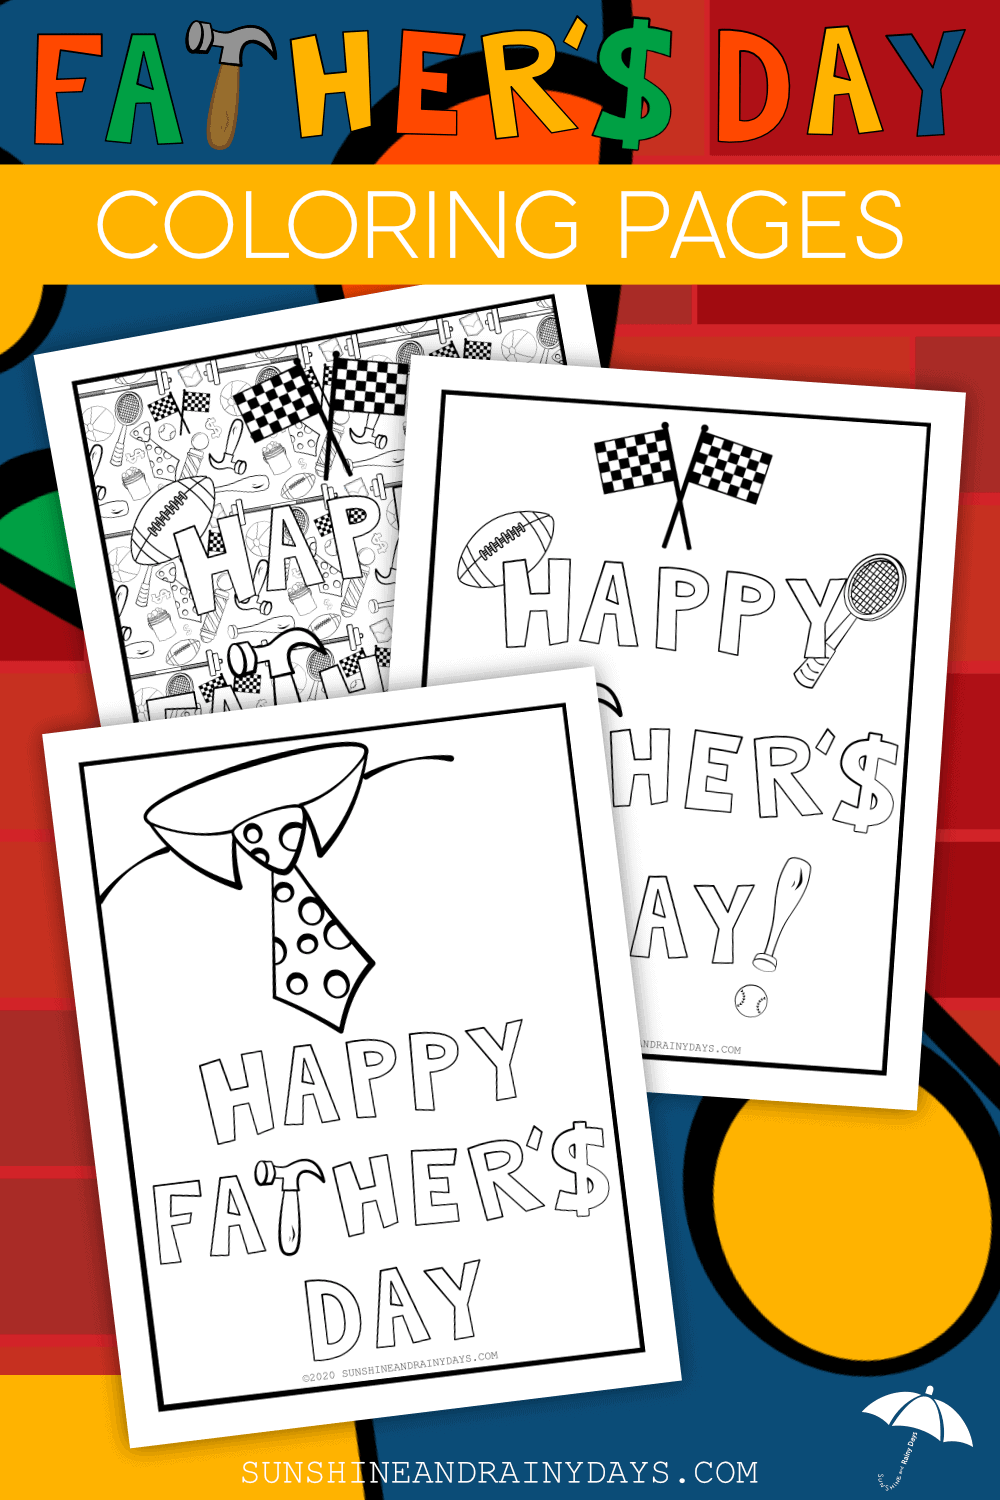 Father's Day Coloring Pages To Print At Home